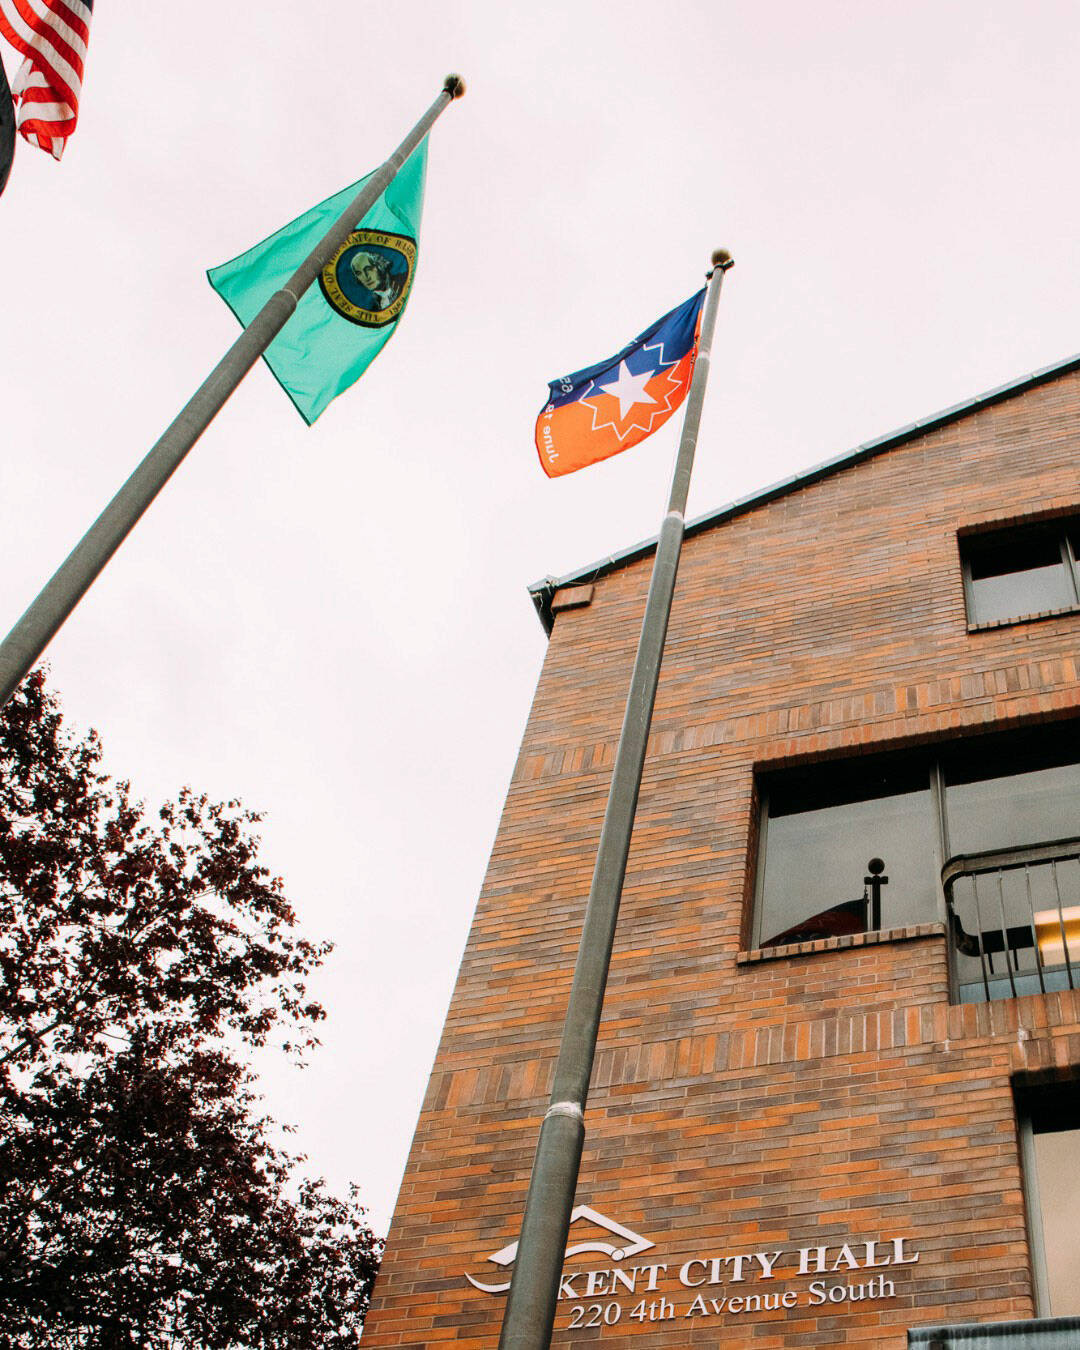 The Juneteenth flag at Kent City Hall. COURTESY PHOTO, City of Kent